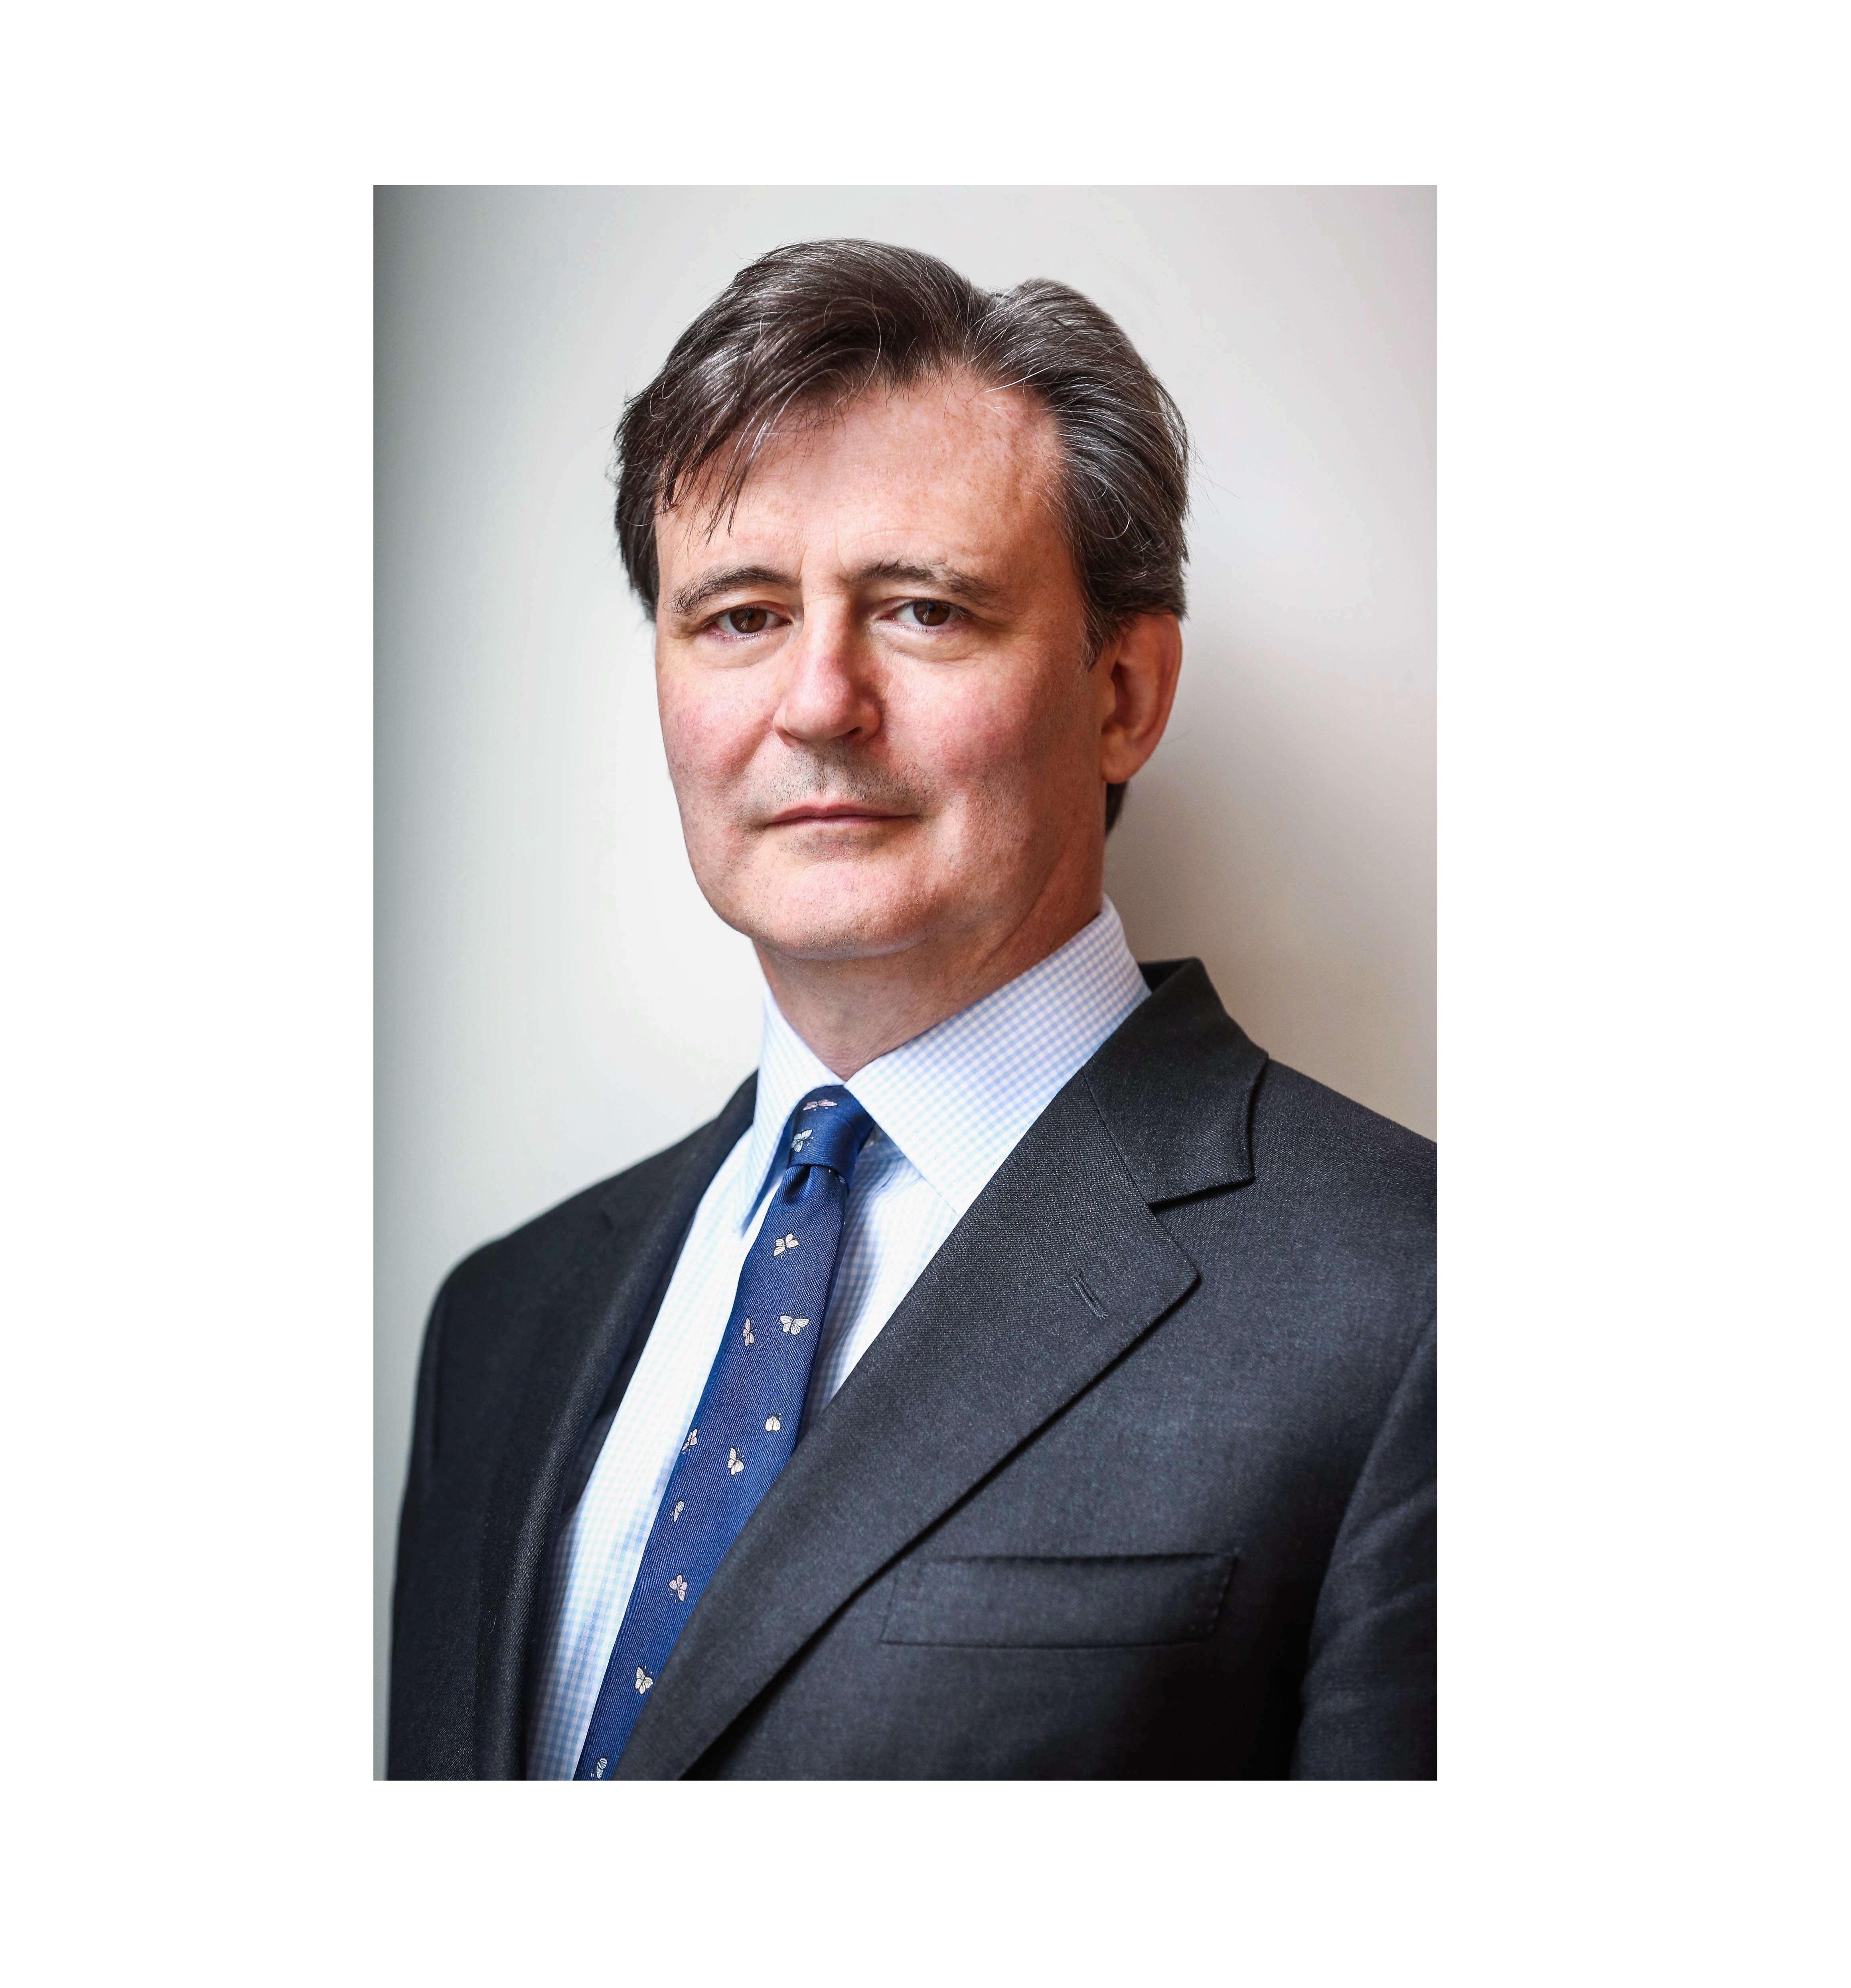 John Micklethwait, Editor-in-Chief of Bloomberg, accepts The Printing Charity’s 2020 Presidency